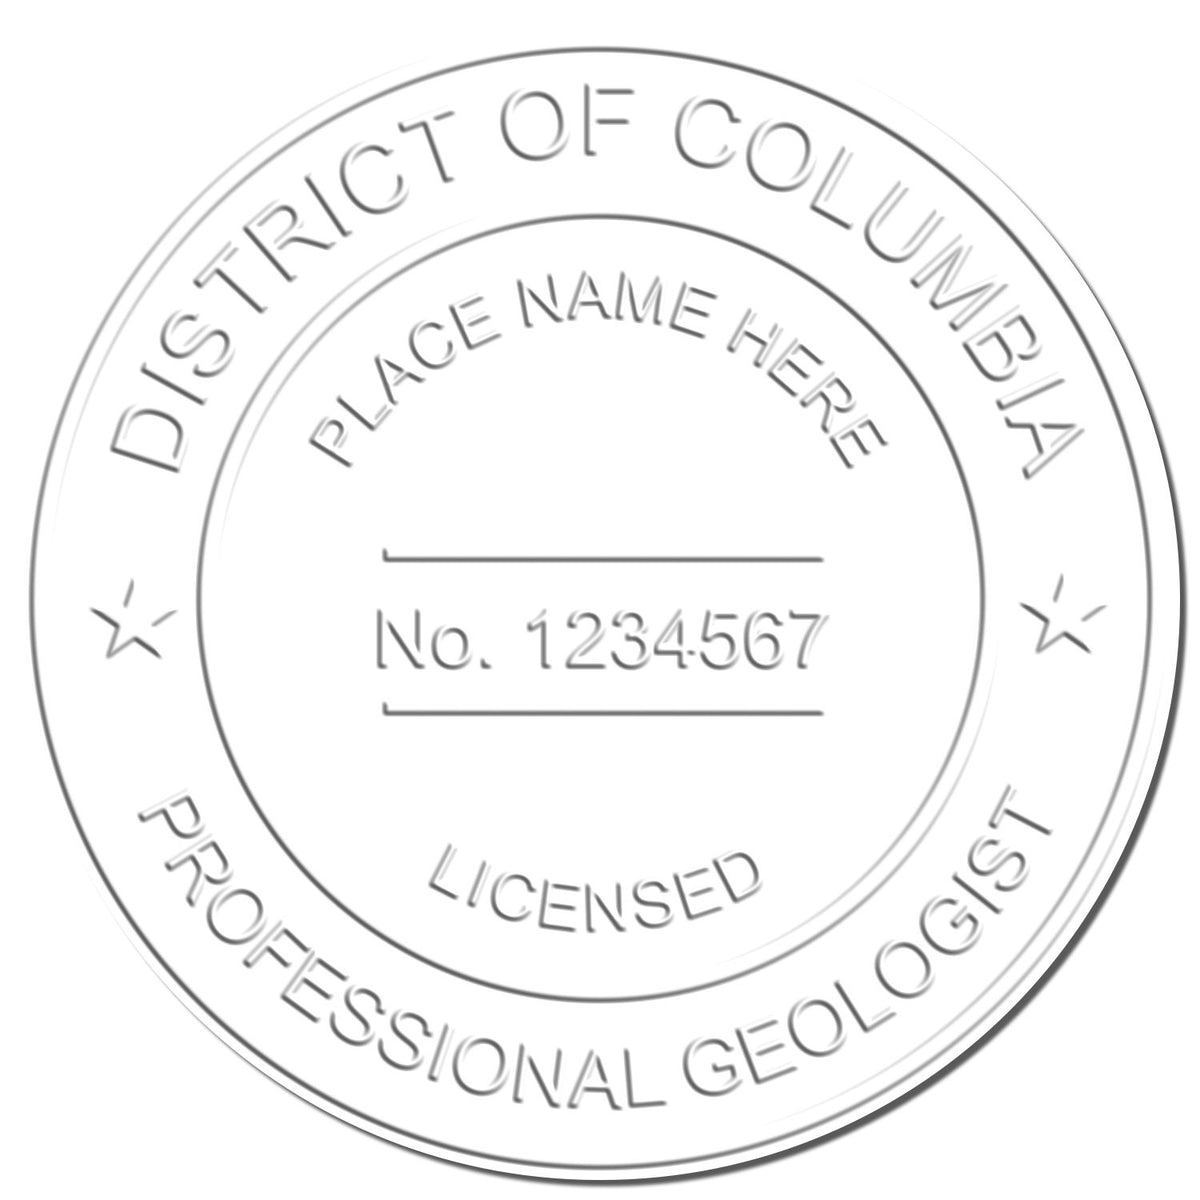 A photograph of the State of District of Columbia Extended Long Reach Geologist Seal stamp impression reveals a vivid, professional image of the on paper.